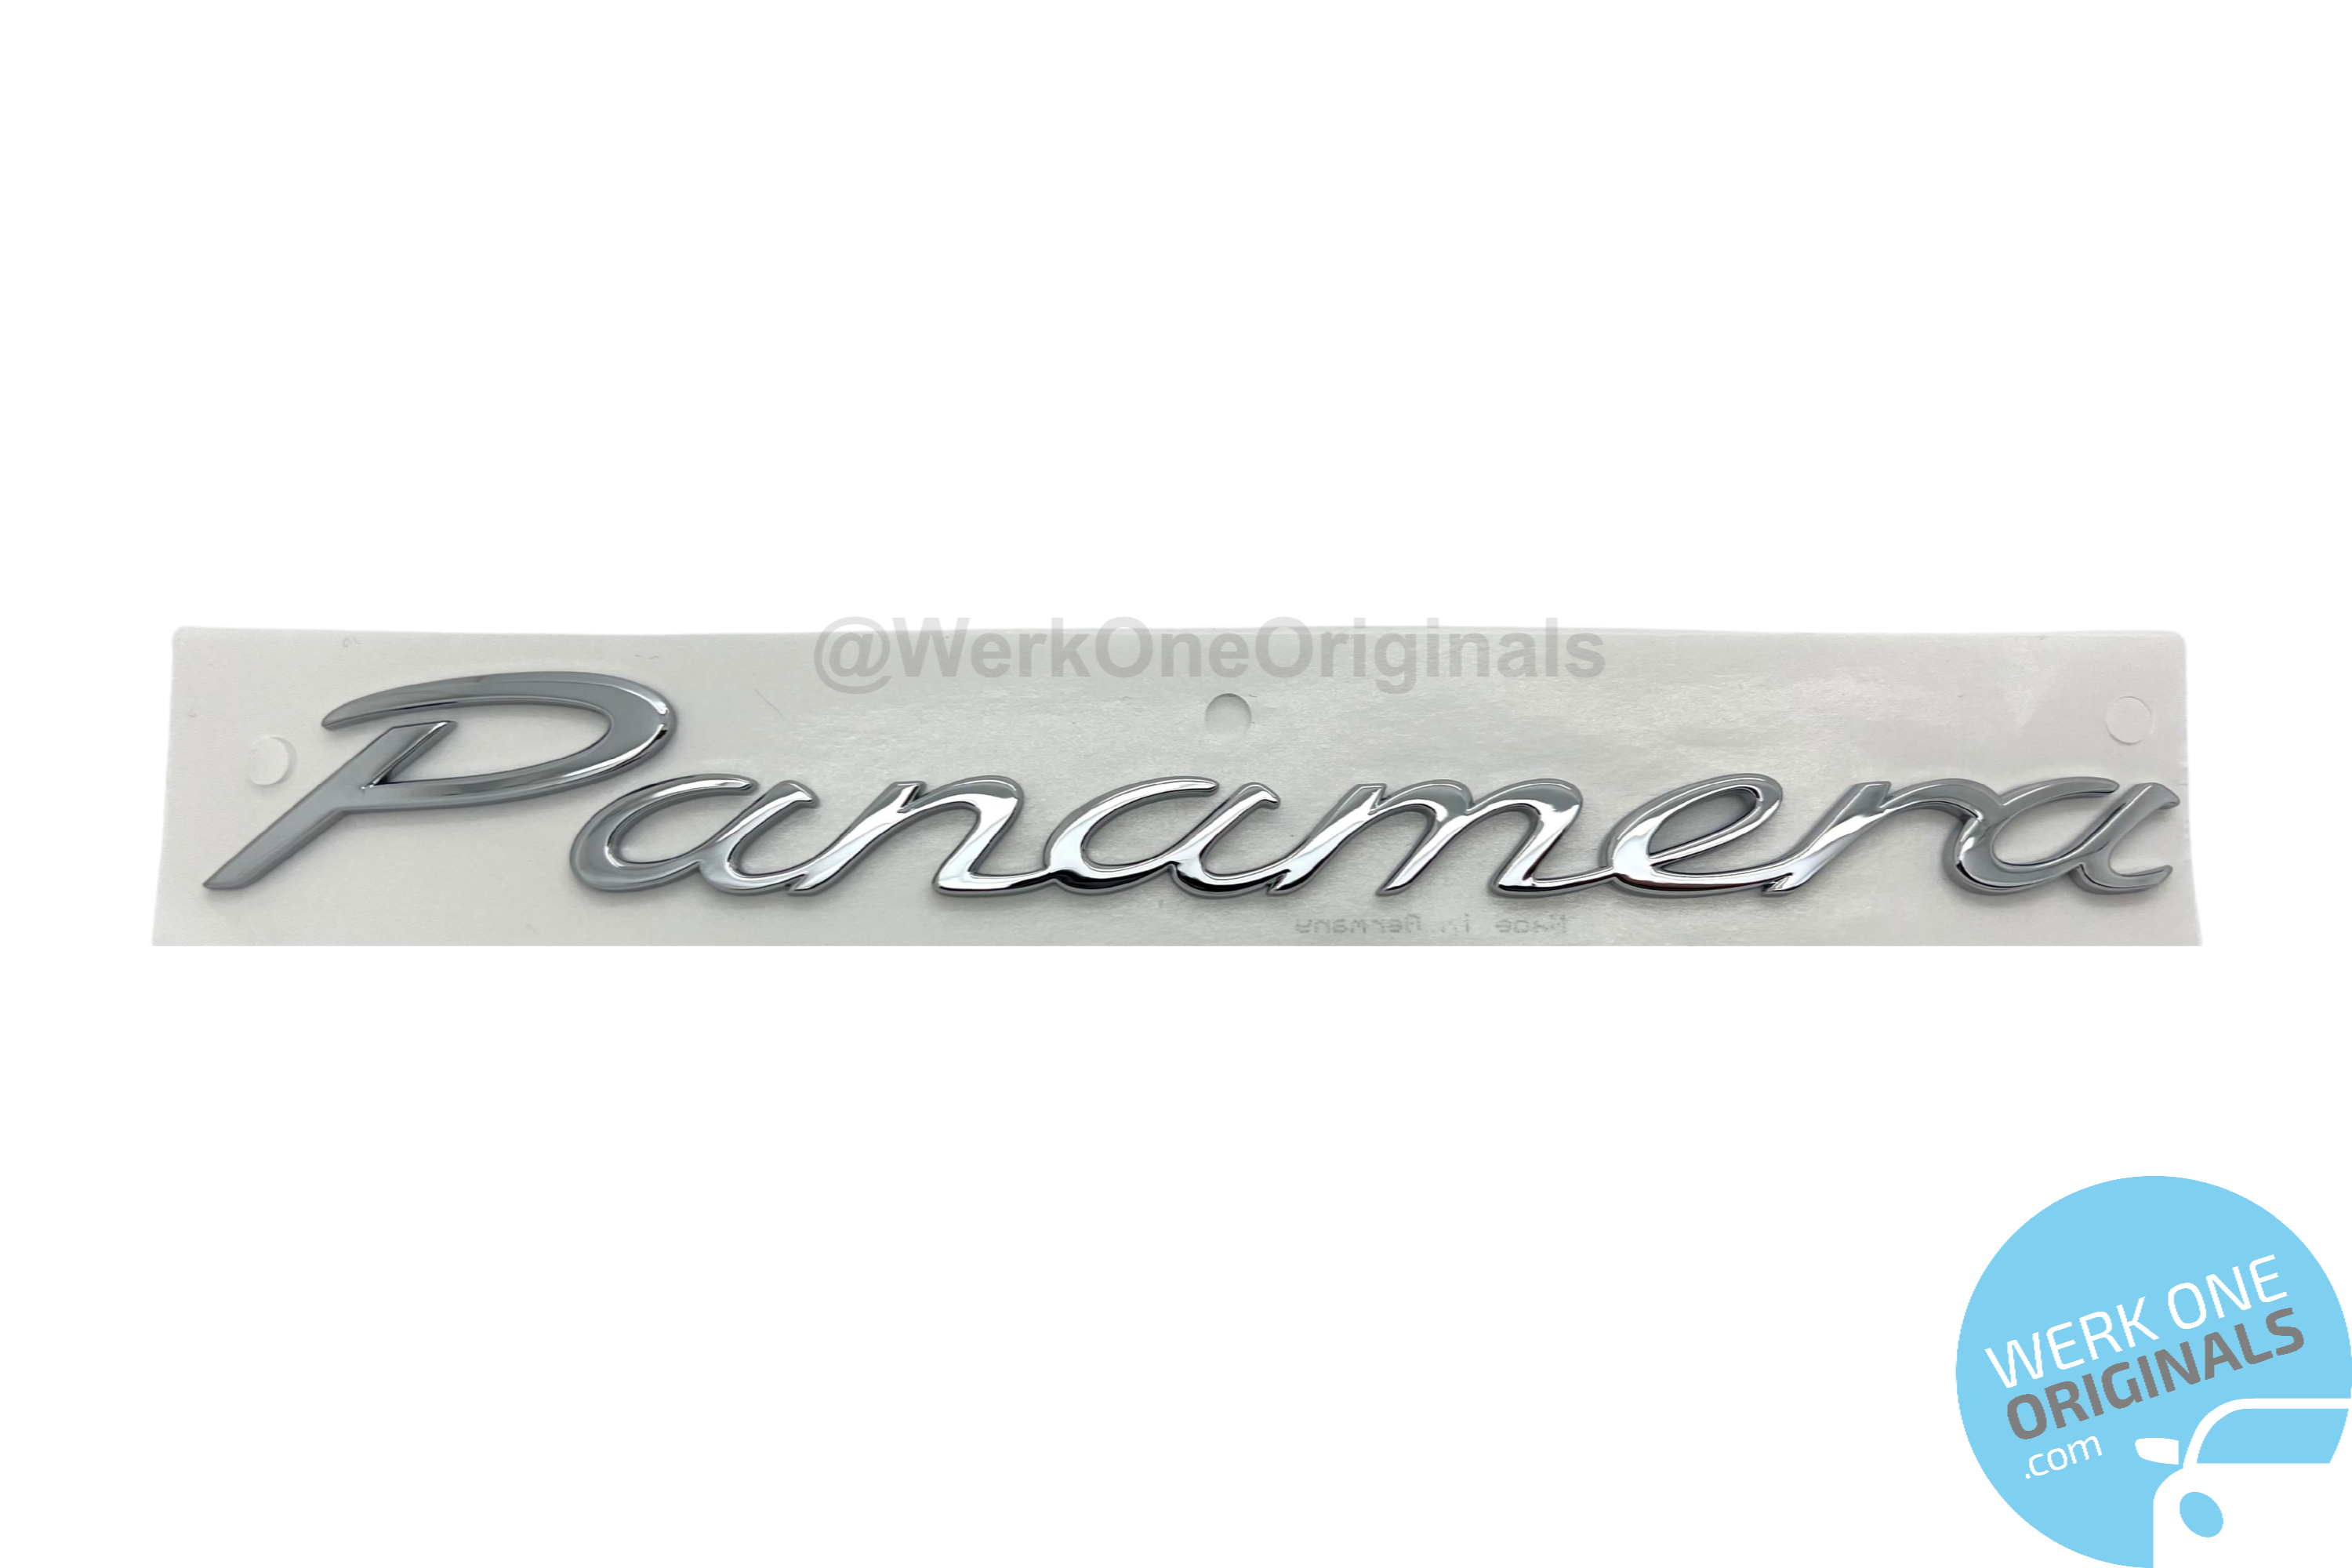 Porsche Official 'Panamera S' Rear Badge Decal in Chrome Silver for Panamera S Type 907 & 970 Models